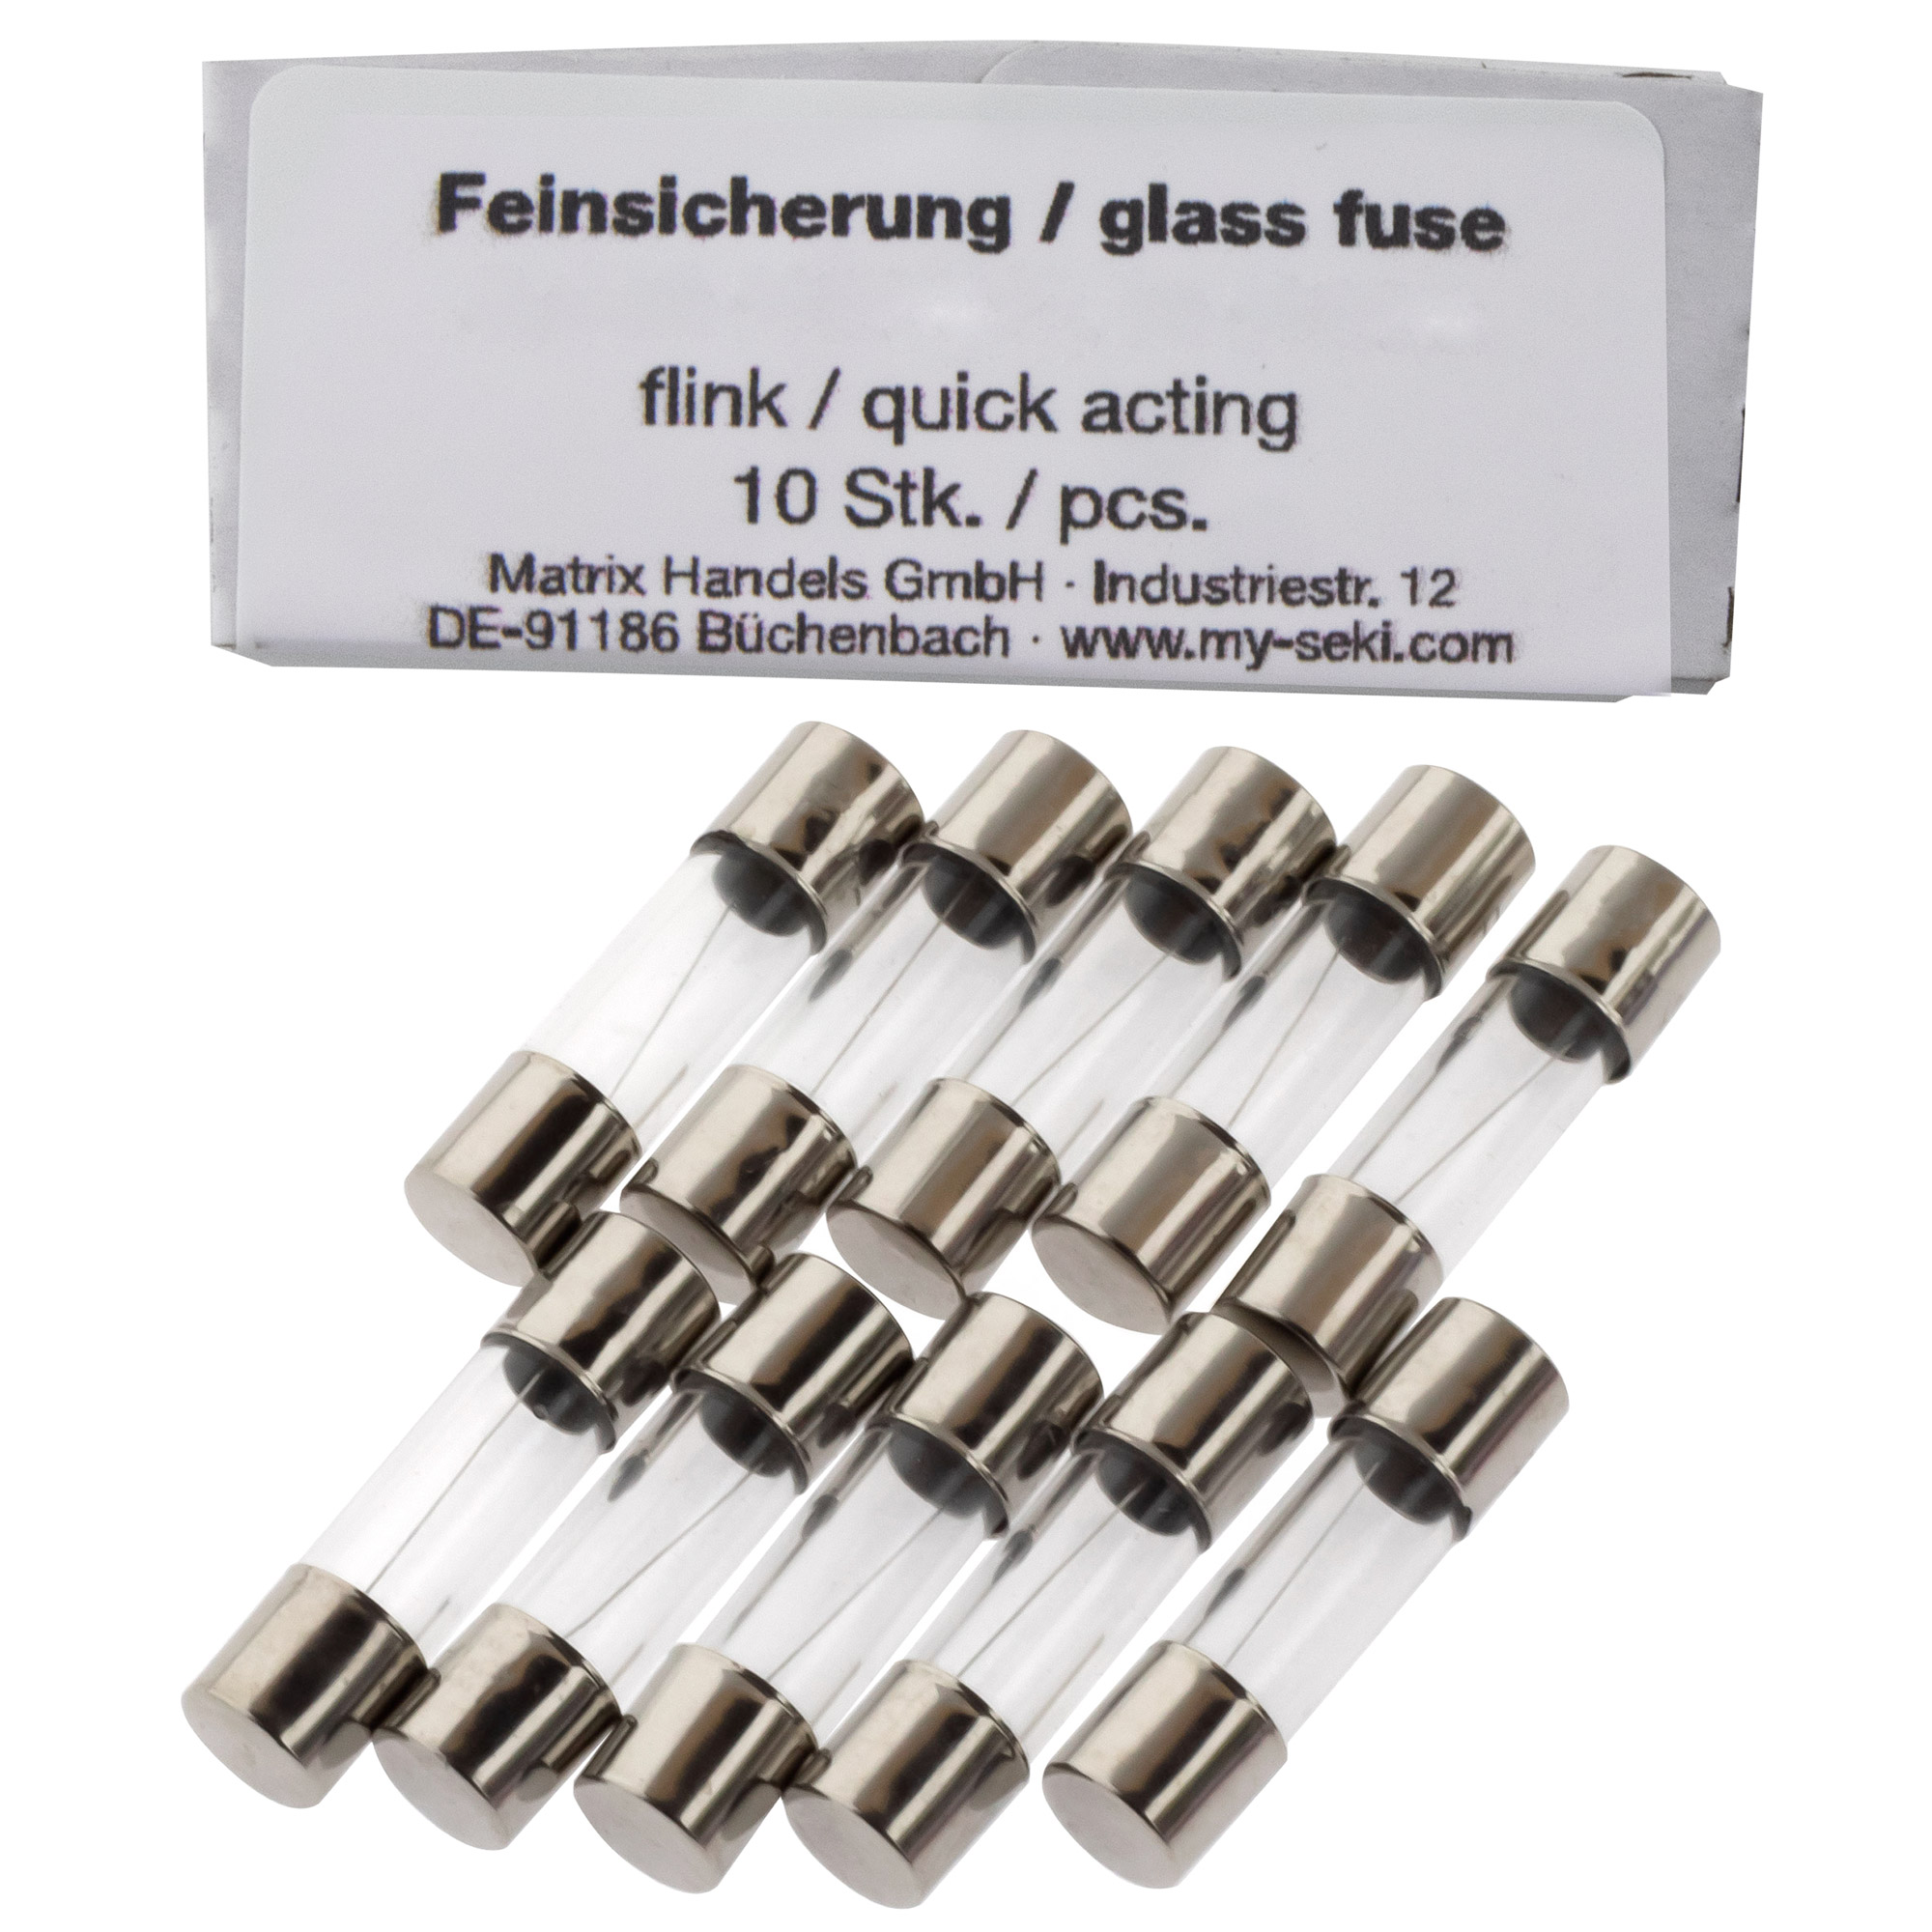 5x20mm glass - quick acting